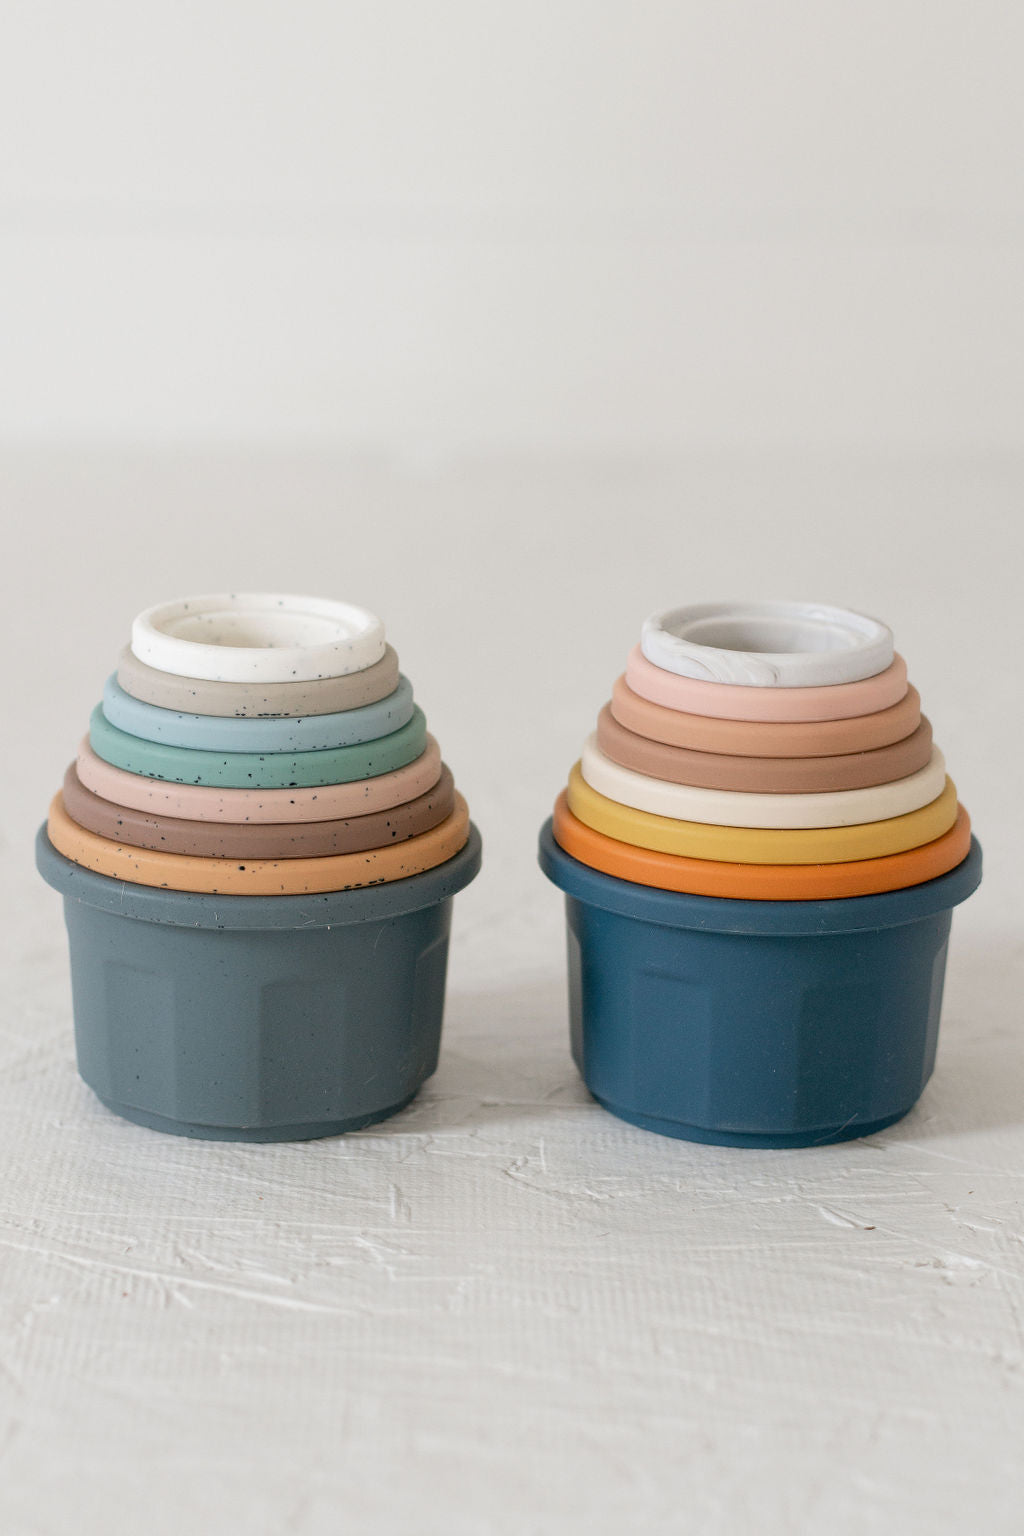 Neutral Tones Silicone Bowls from My Little Songbird